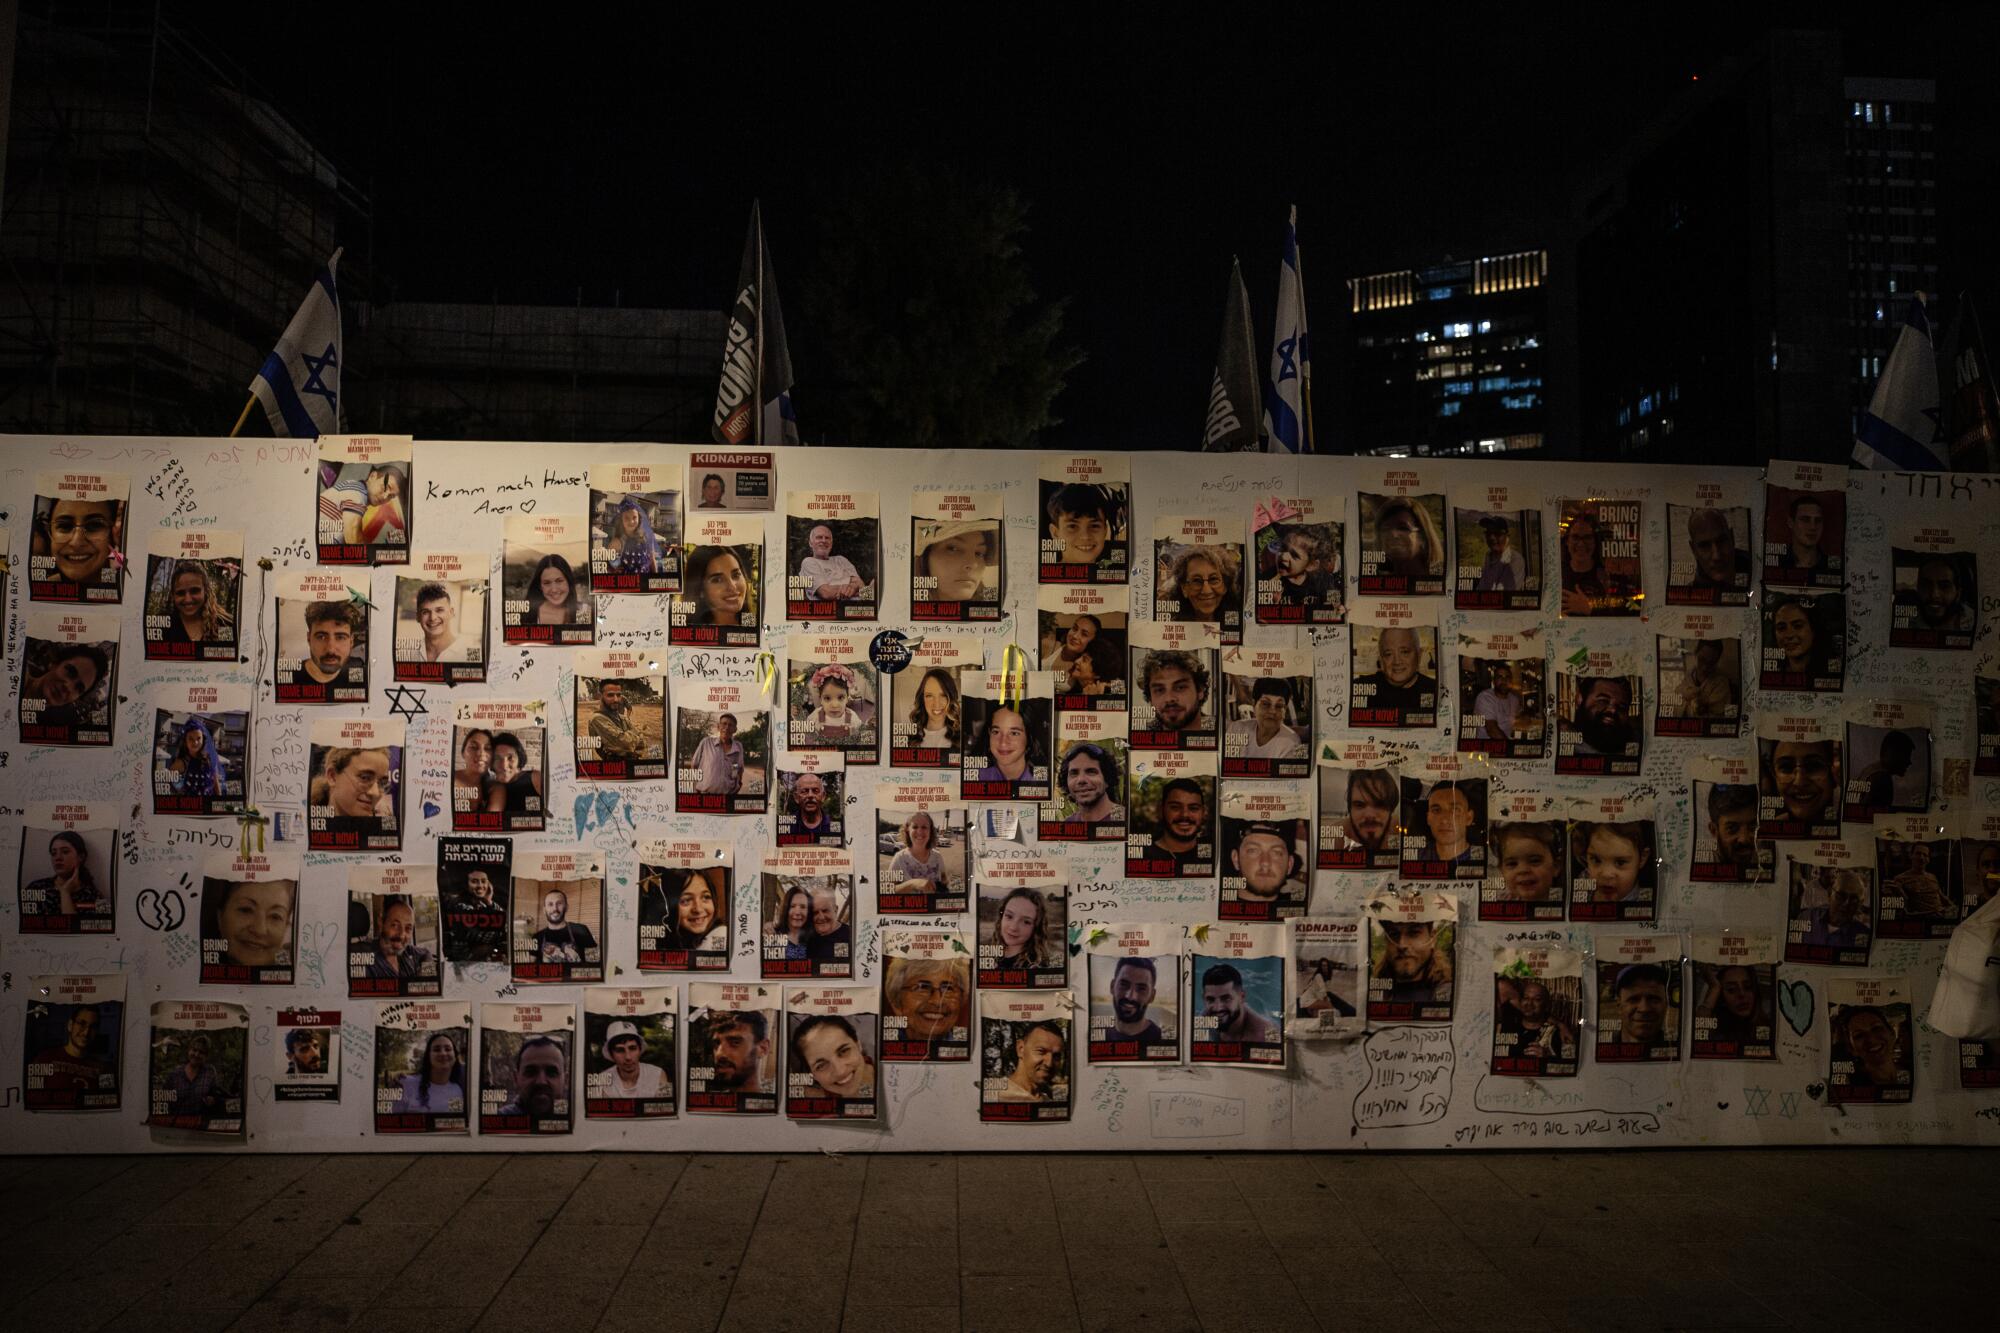 An exterior wall at night, covered in photos of individuals